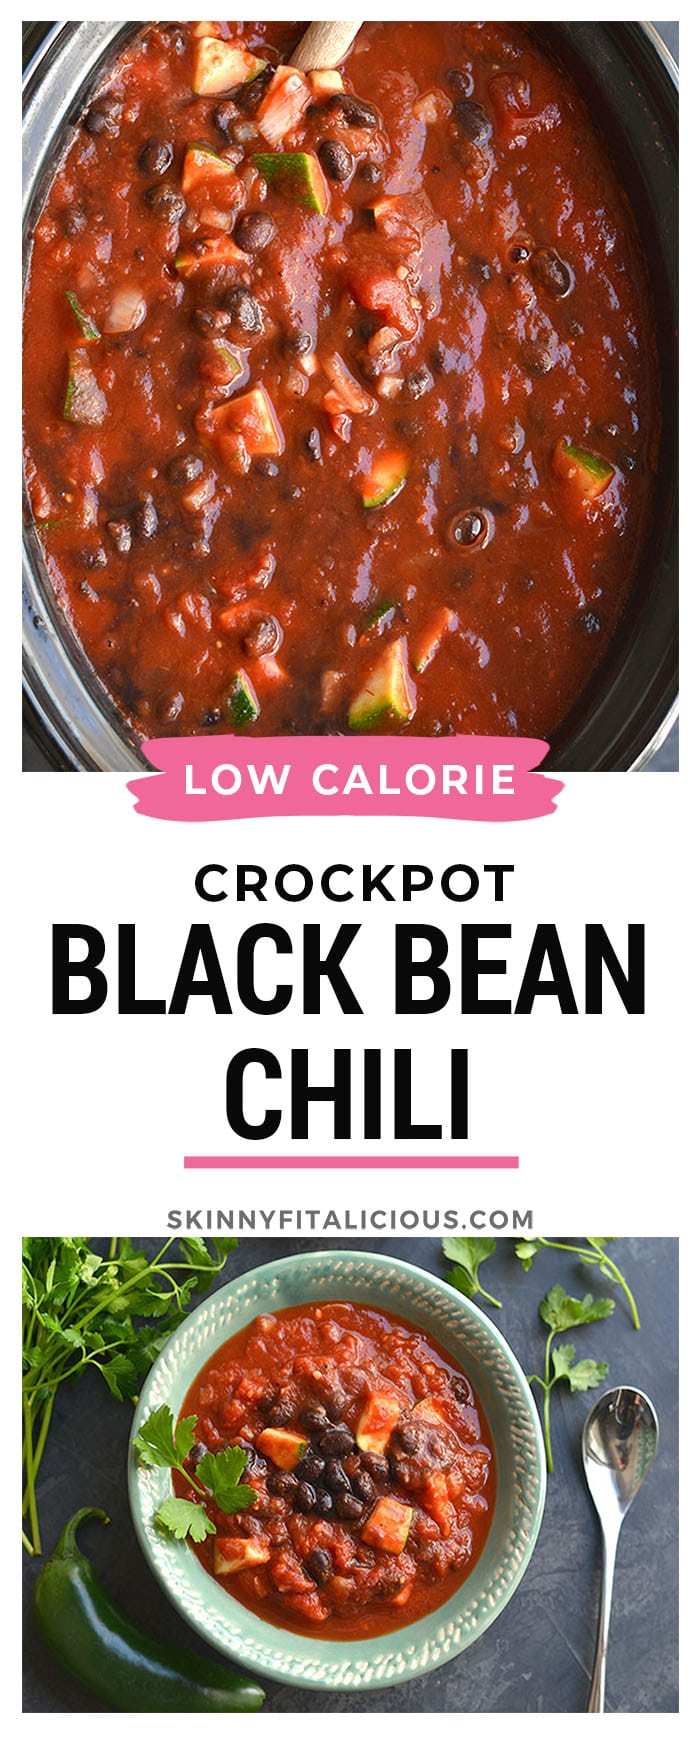 Slow Cooker Black Bean Chili! This vegan chili is full of zucchini and beans with a kick of spice! Hearty, filling, perfect for warming up on a cold day! Gluten Free + Low Calorie + Vegan